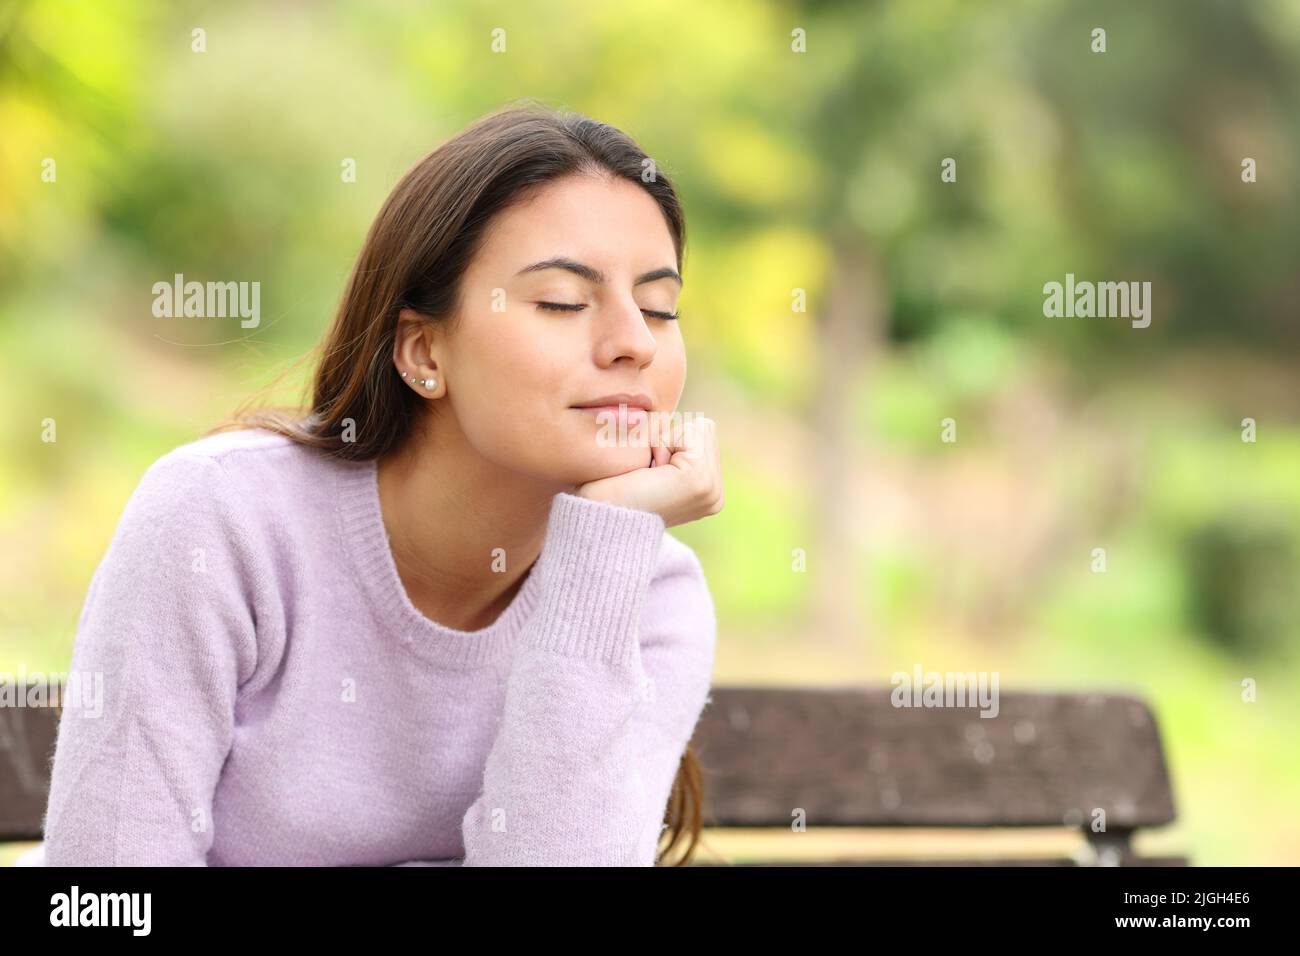 Teen relaxing and resting sitting on a bench in a green park Stock Photo